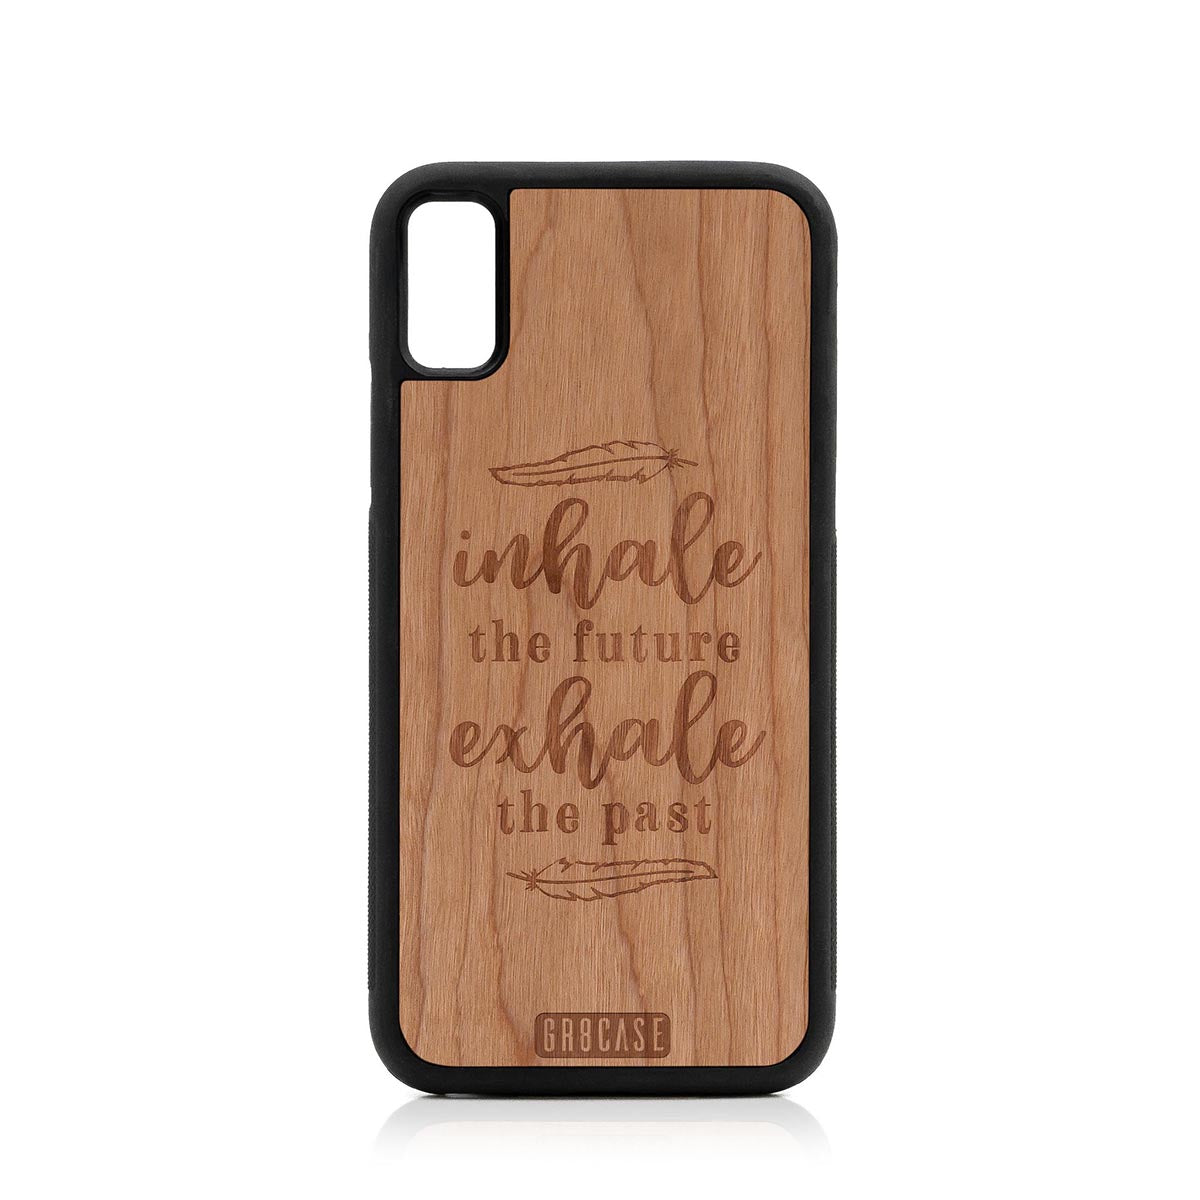 Inhale Future Exhale The Past Design Wood Case For iPhone X/XS by GR8CASE